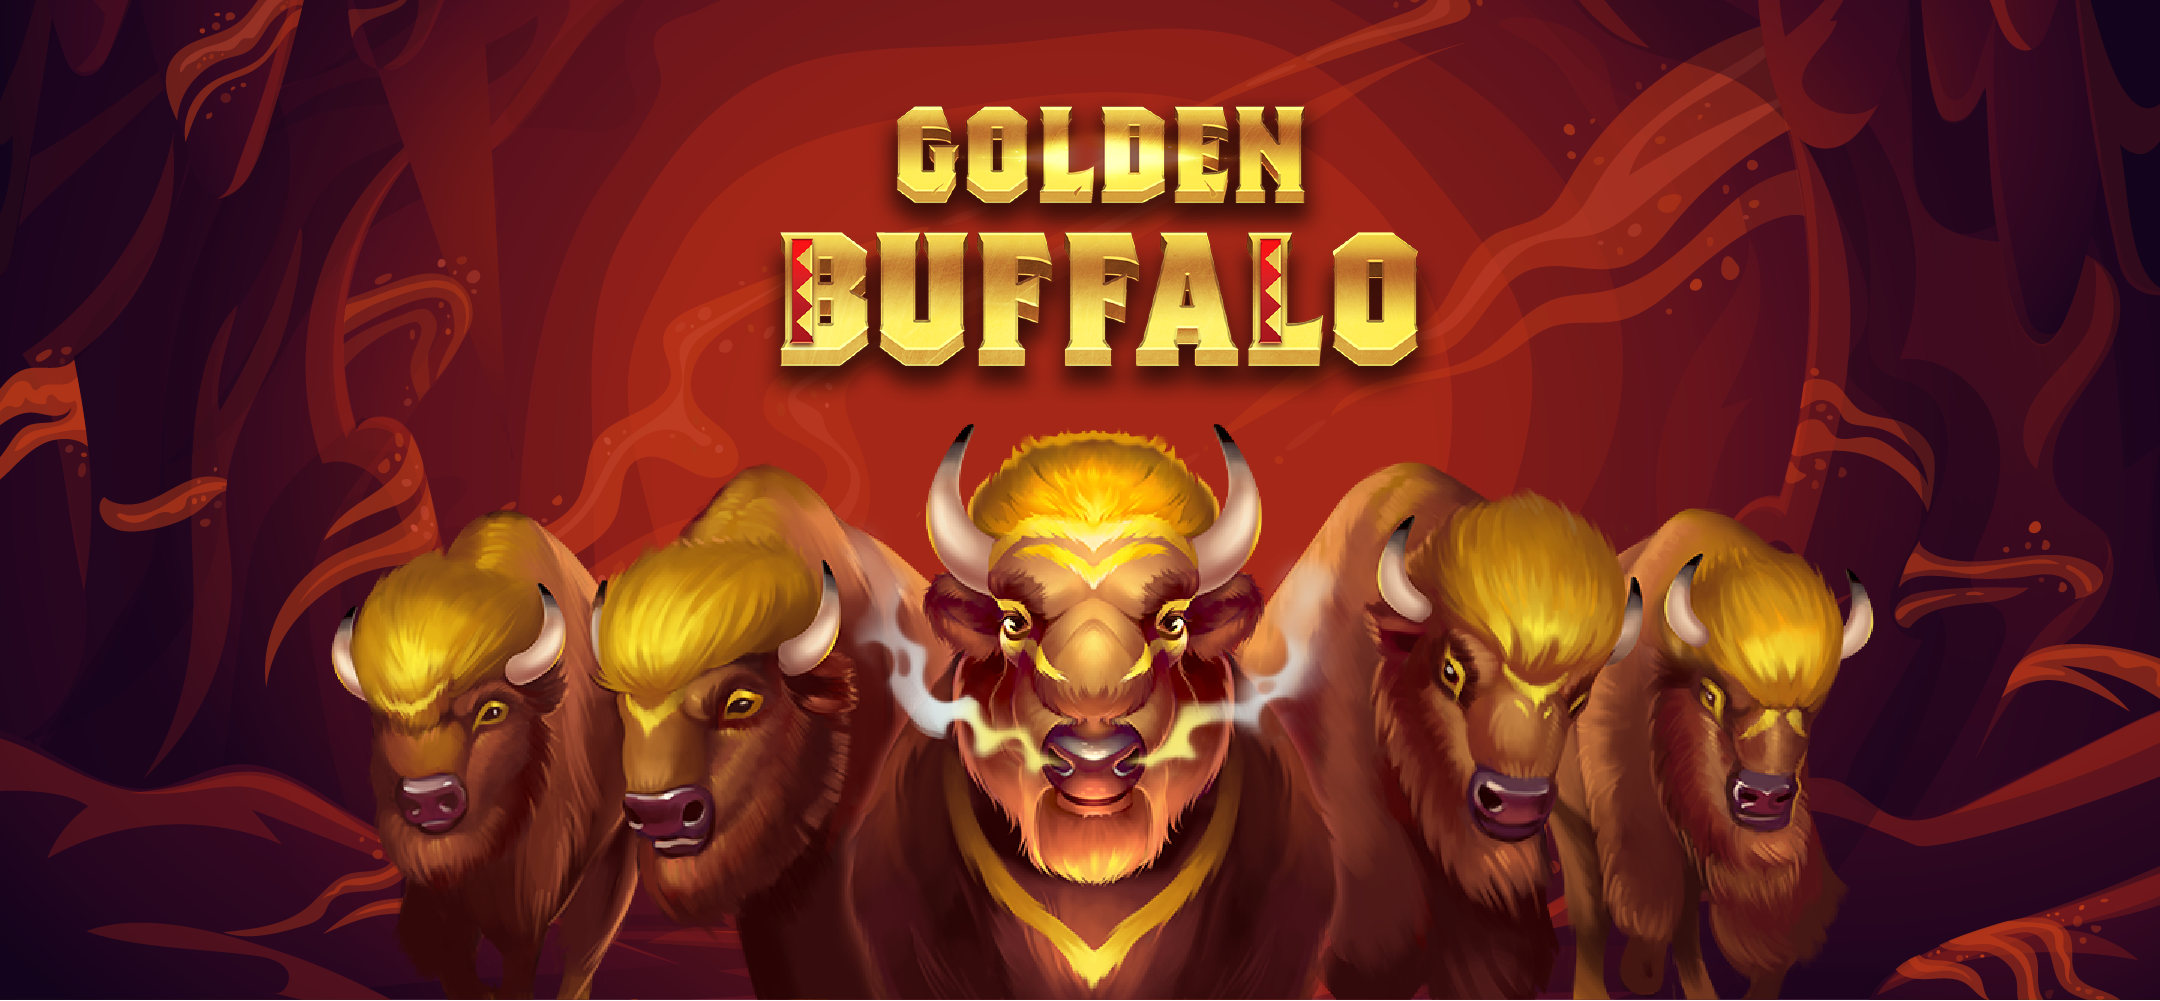 Read Bodog’s review of one of the hottest games online, Golden Buffalo, and get set for an adventure through the western canyons as you search for the elusive buffalo who has a tendency of showering rewards.